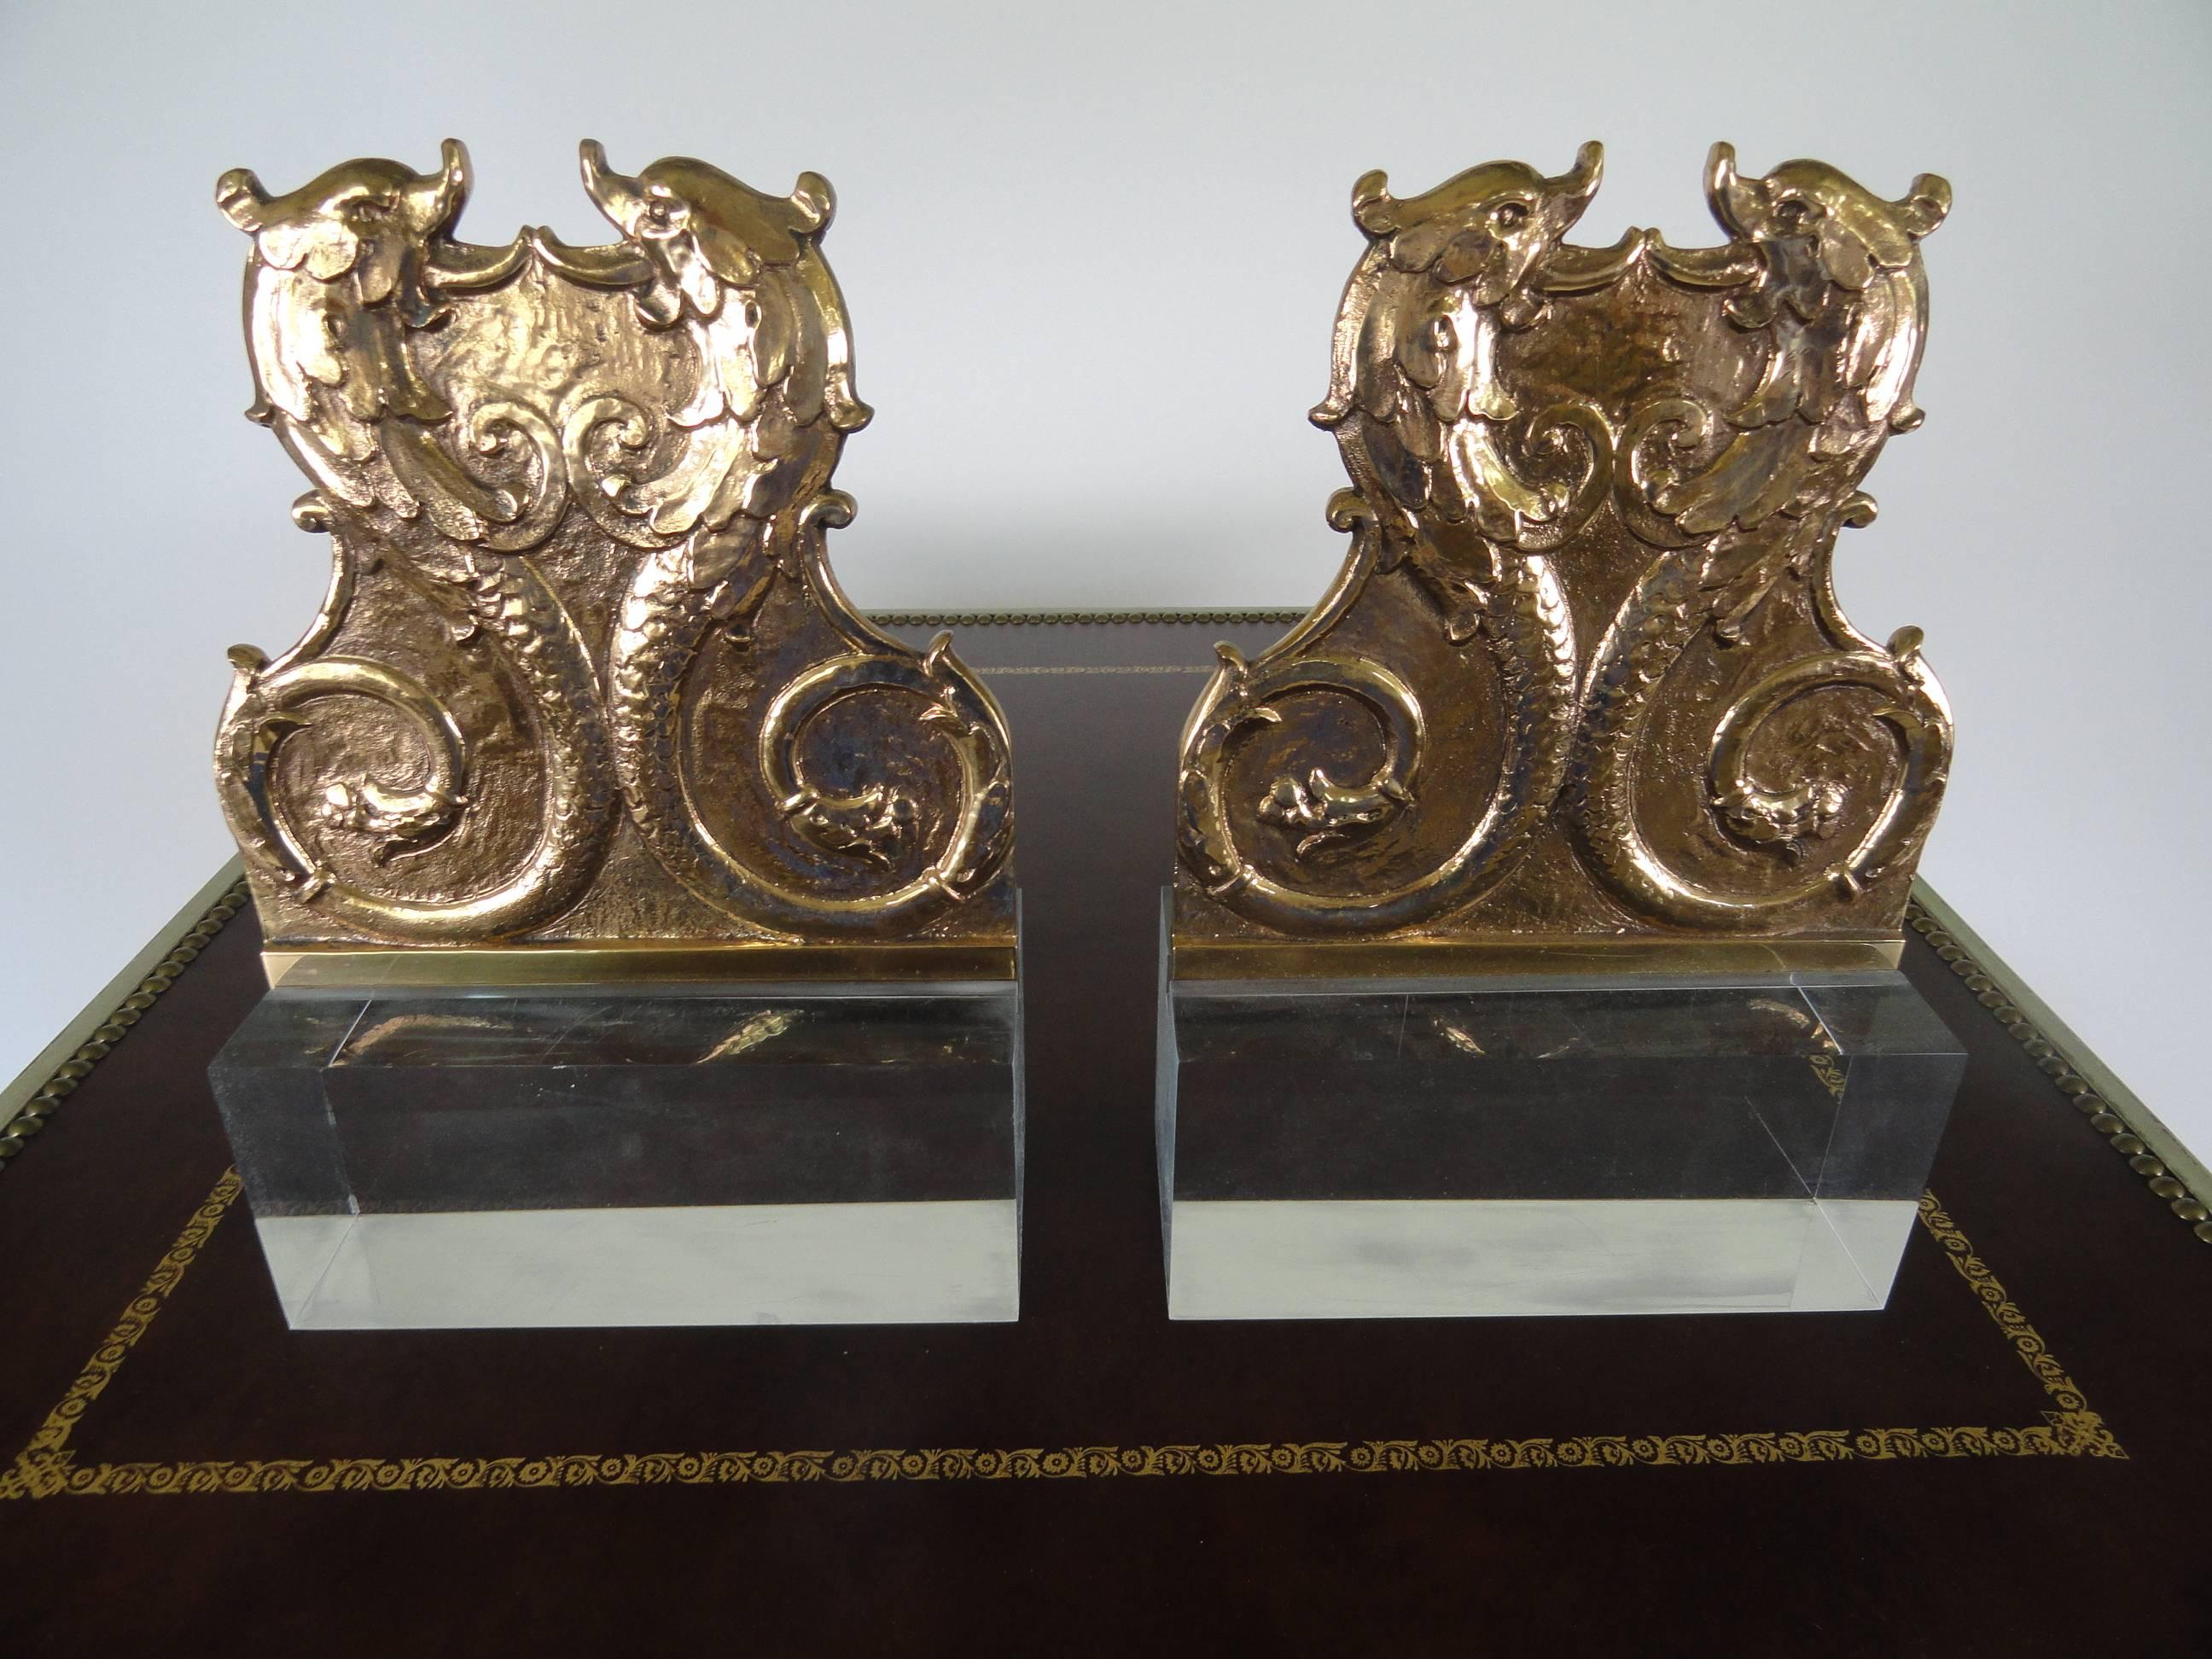 Pair of 19th century French bronze decor dolphin plaques mounted on custom acrylic clear bases.